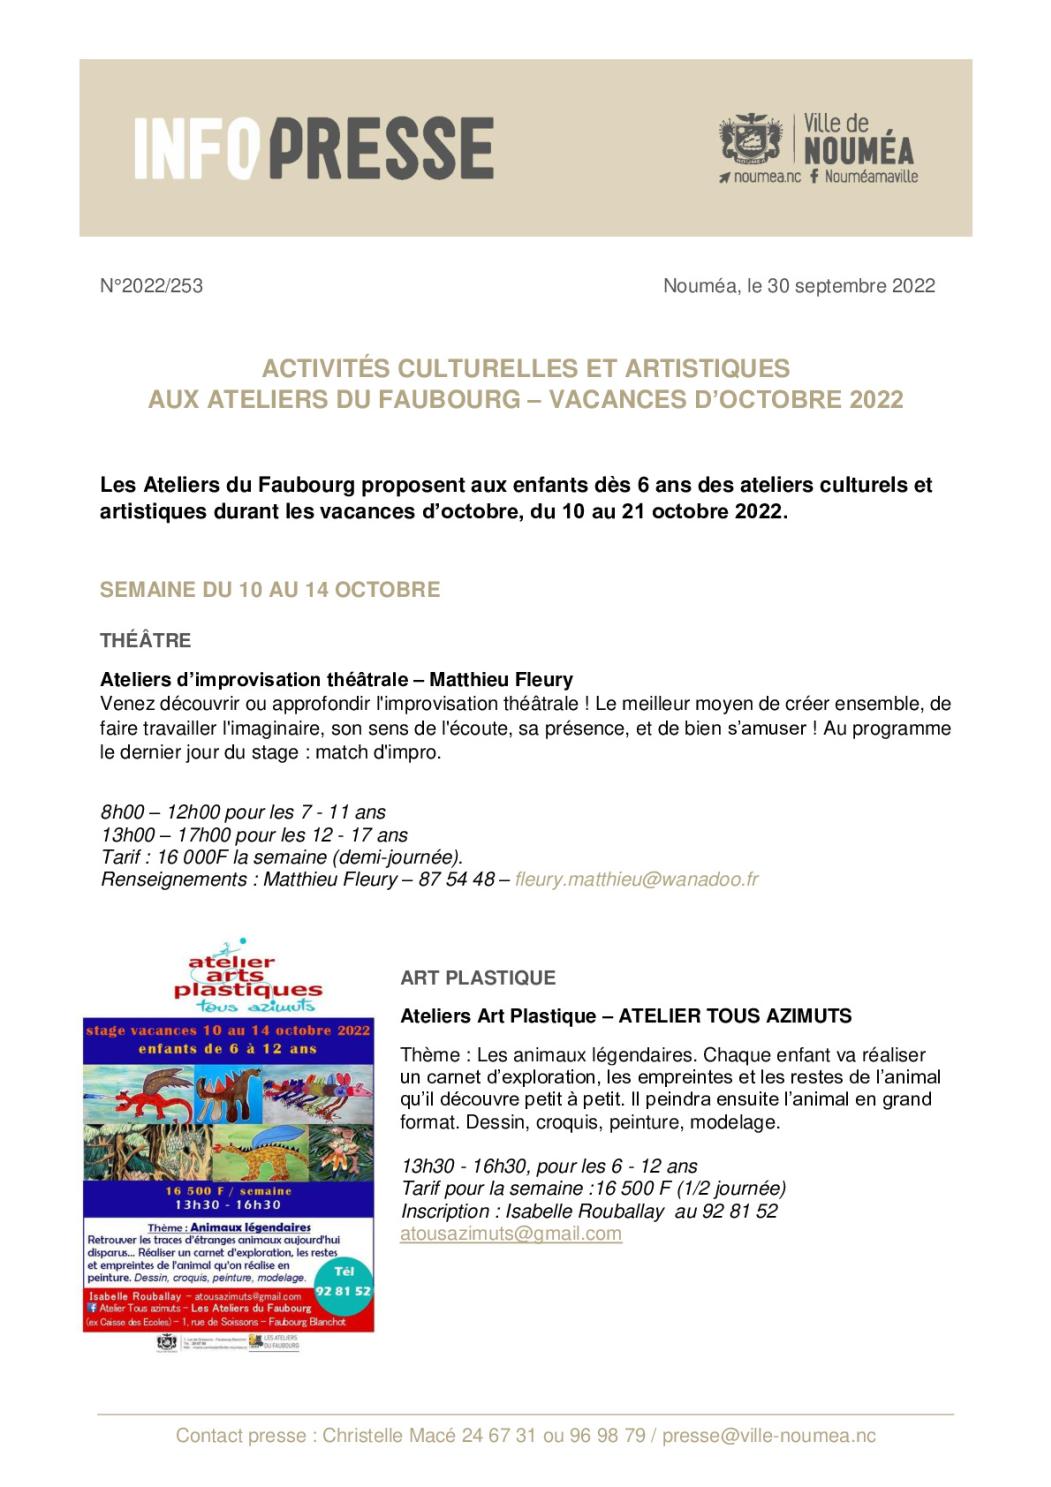 IP 253 Programme Ateliers Faubourg Oct 22.pdf